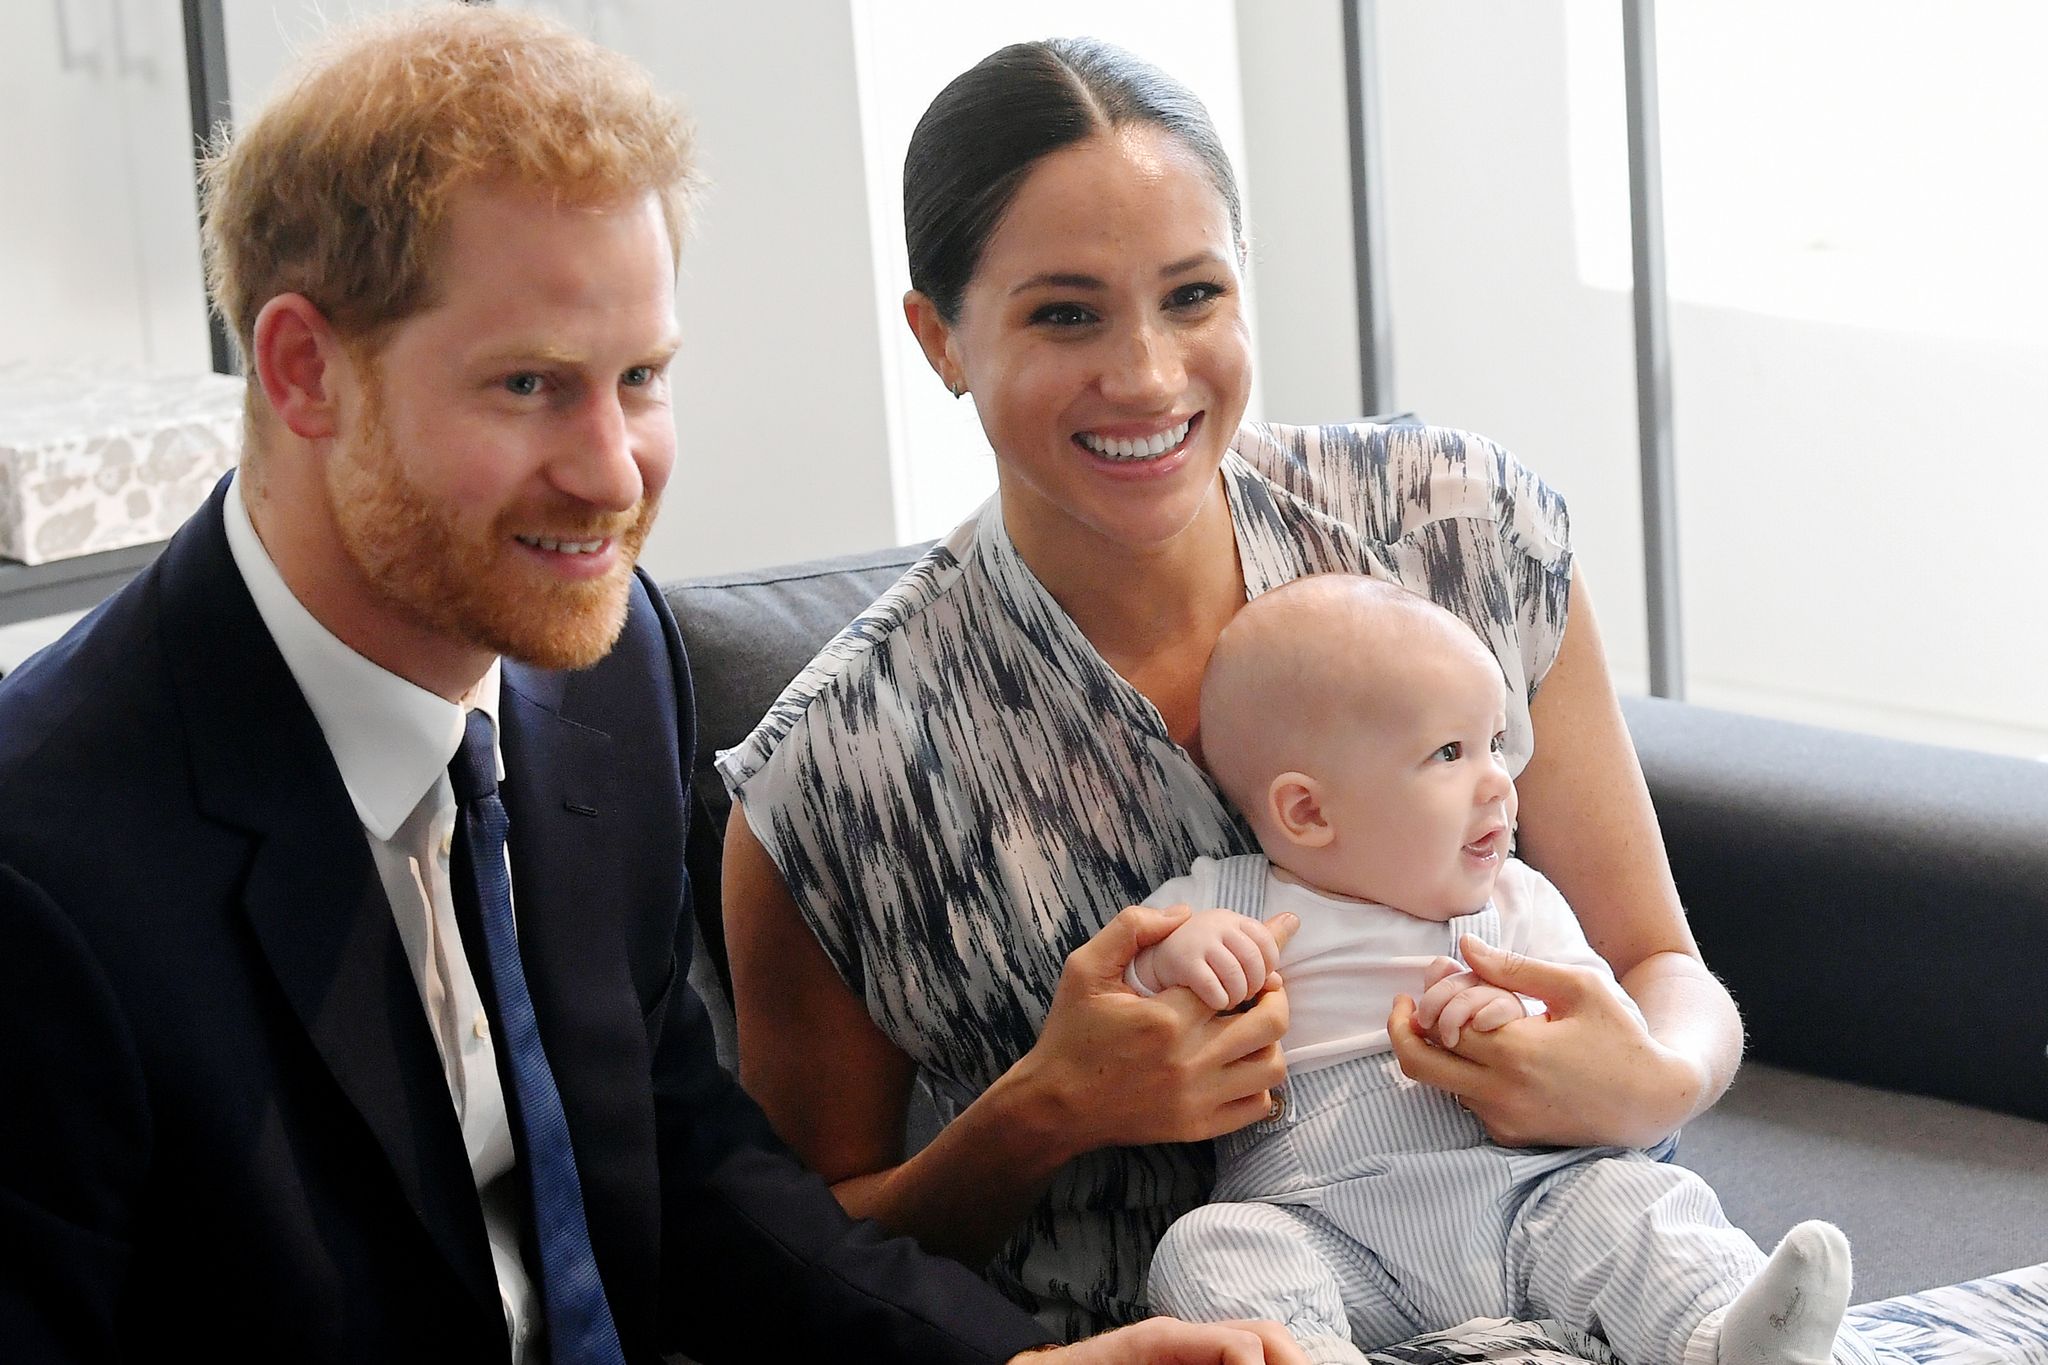 Portrait of Prince Harry Meghan Markle, and their son Archie Mountbatten-Windsor during their royal tour of South Africa on September 25, 2019 in Cape Town, South Africa | Photo: Getty Images